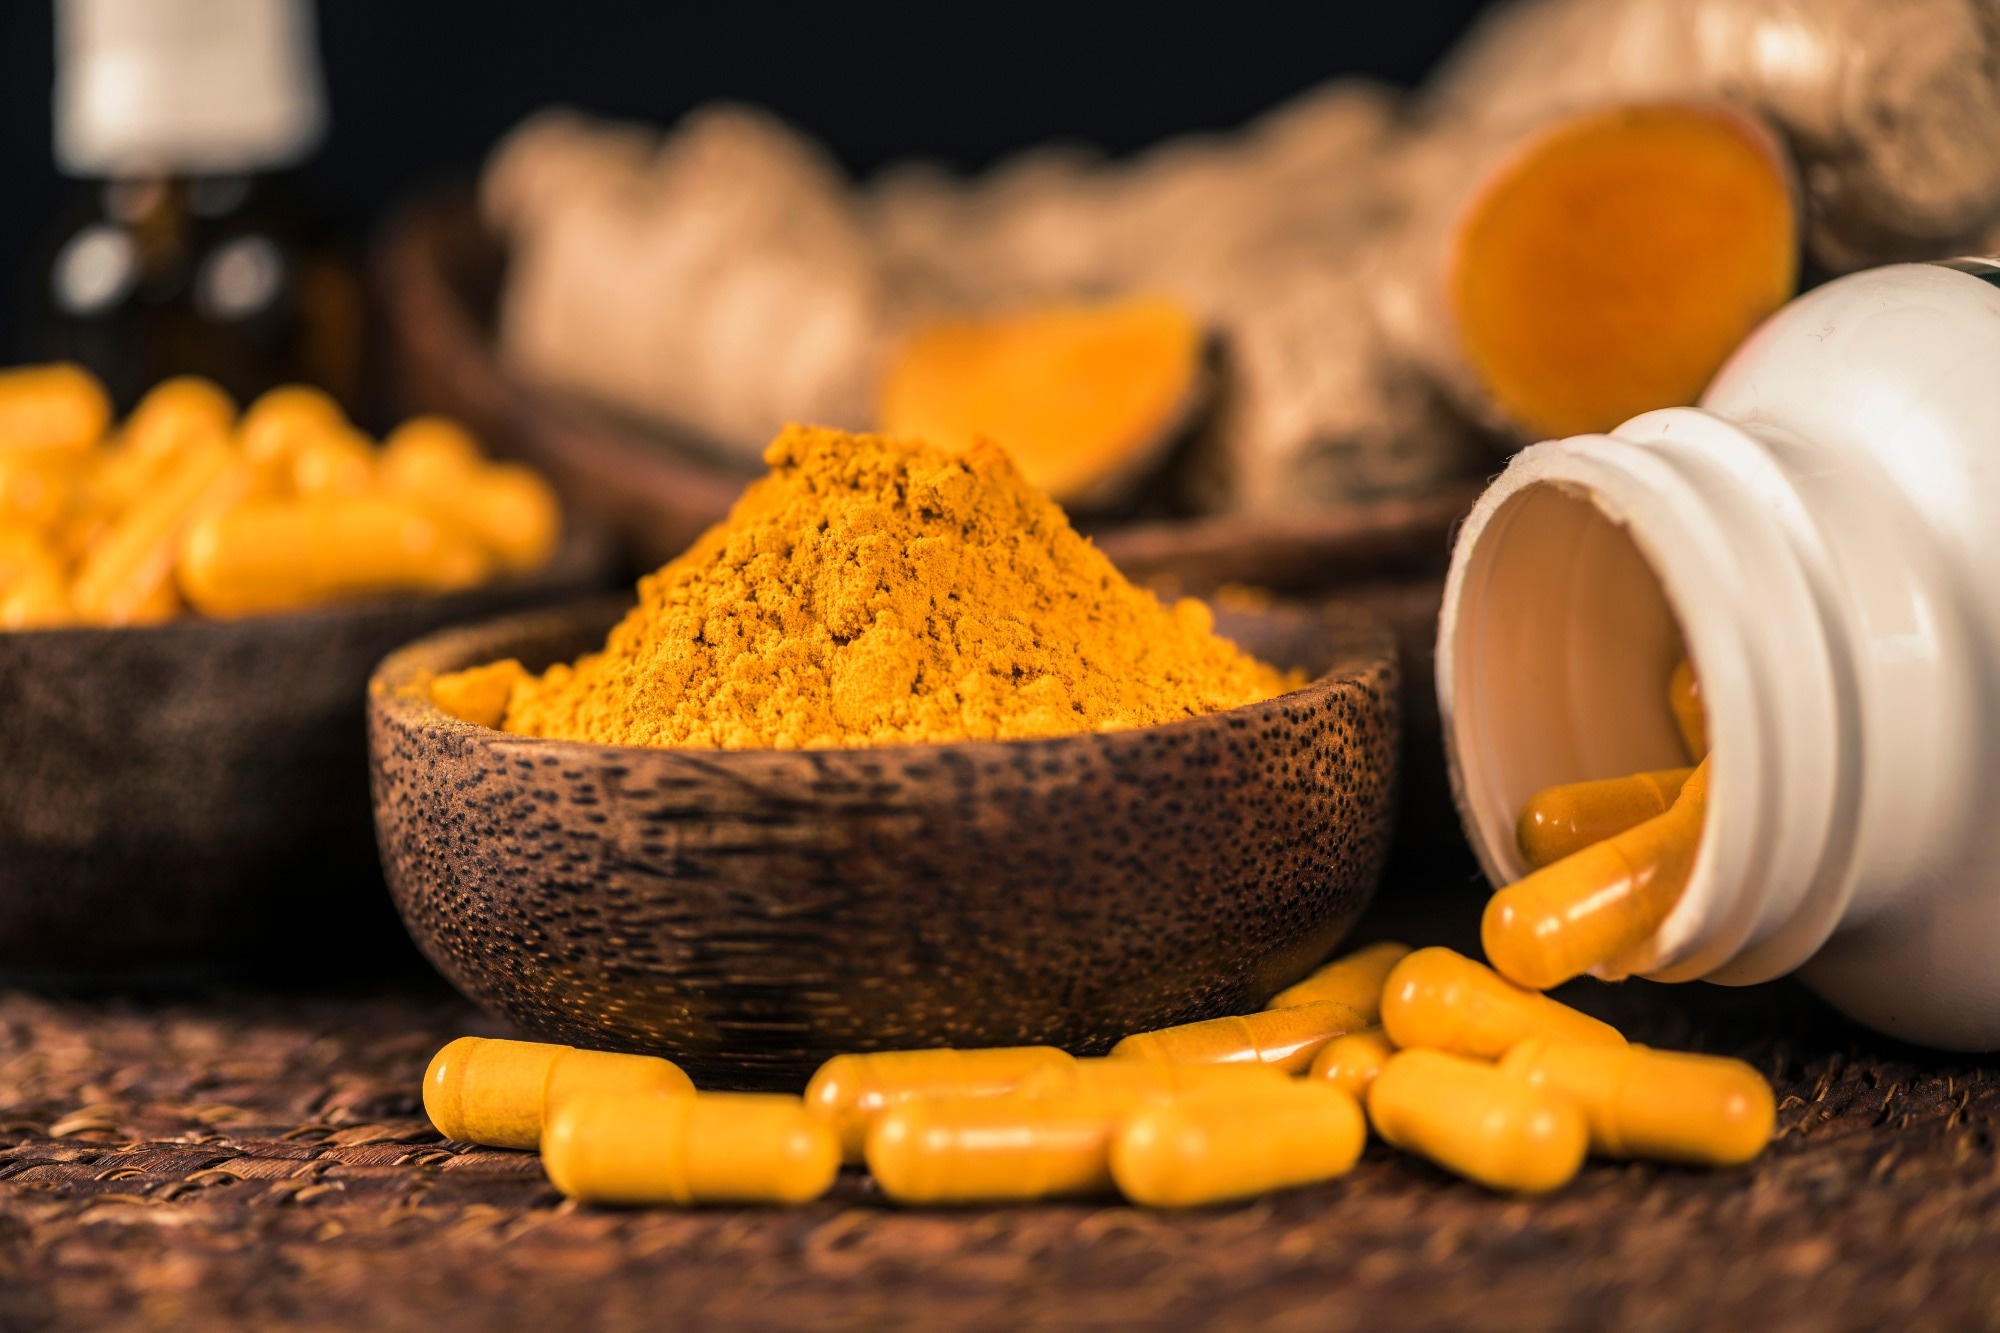 Study: Enhancing the Bioavailability and Bioactivity of Curcumin for Disease Prevention and Treatment. Image Credit: Microgen / Shutterstock